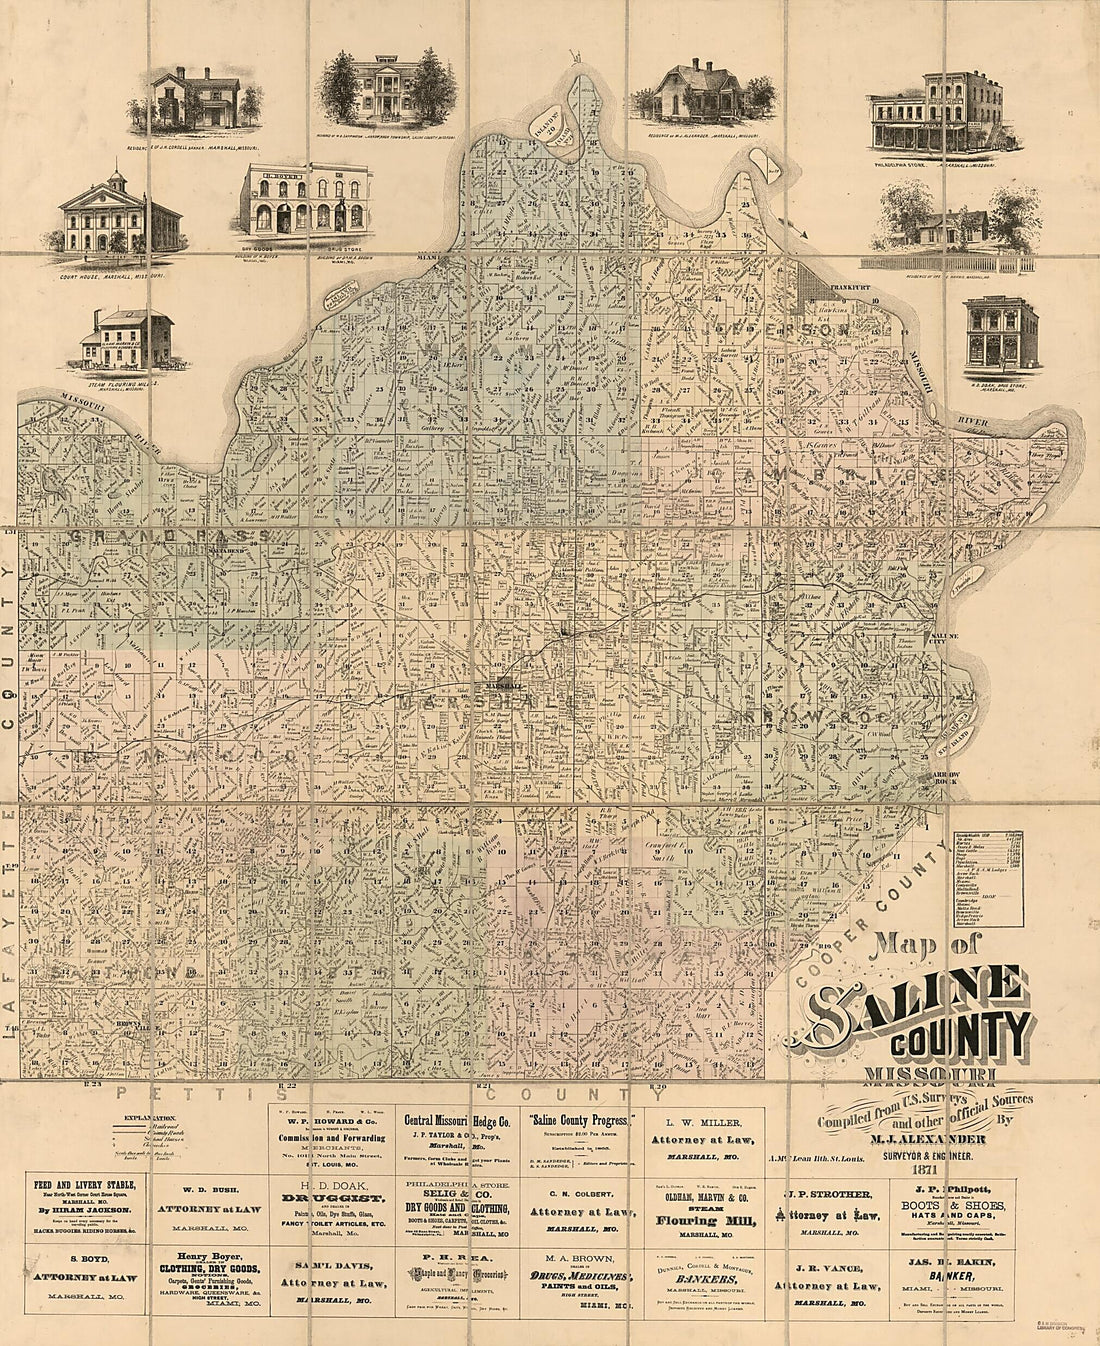 This old map of Map of Saline County, Missouri from 1871 was created by M. J. Alexander in 1871